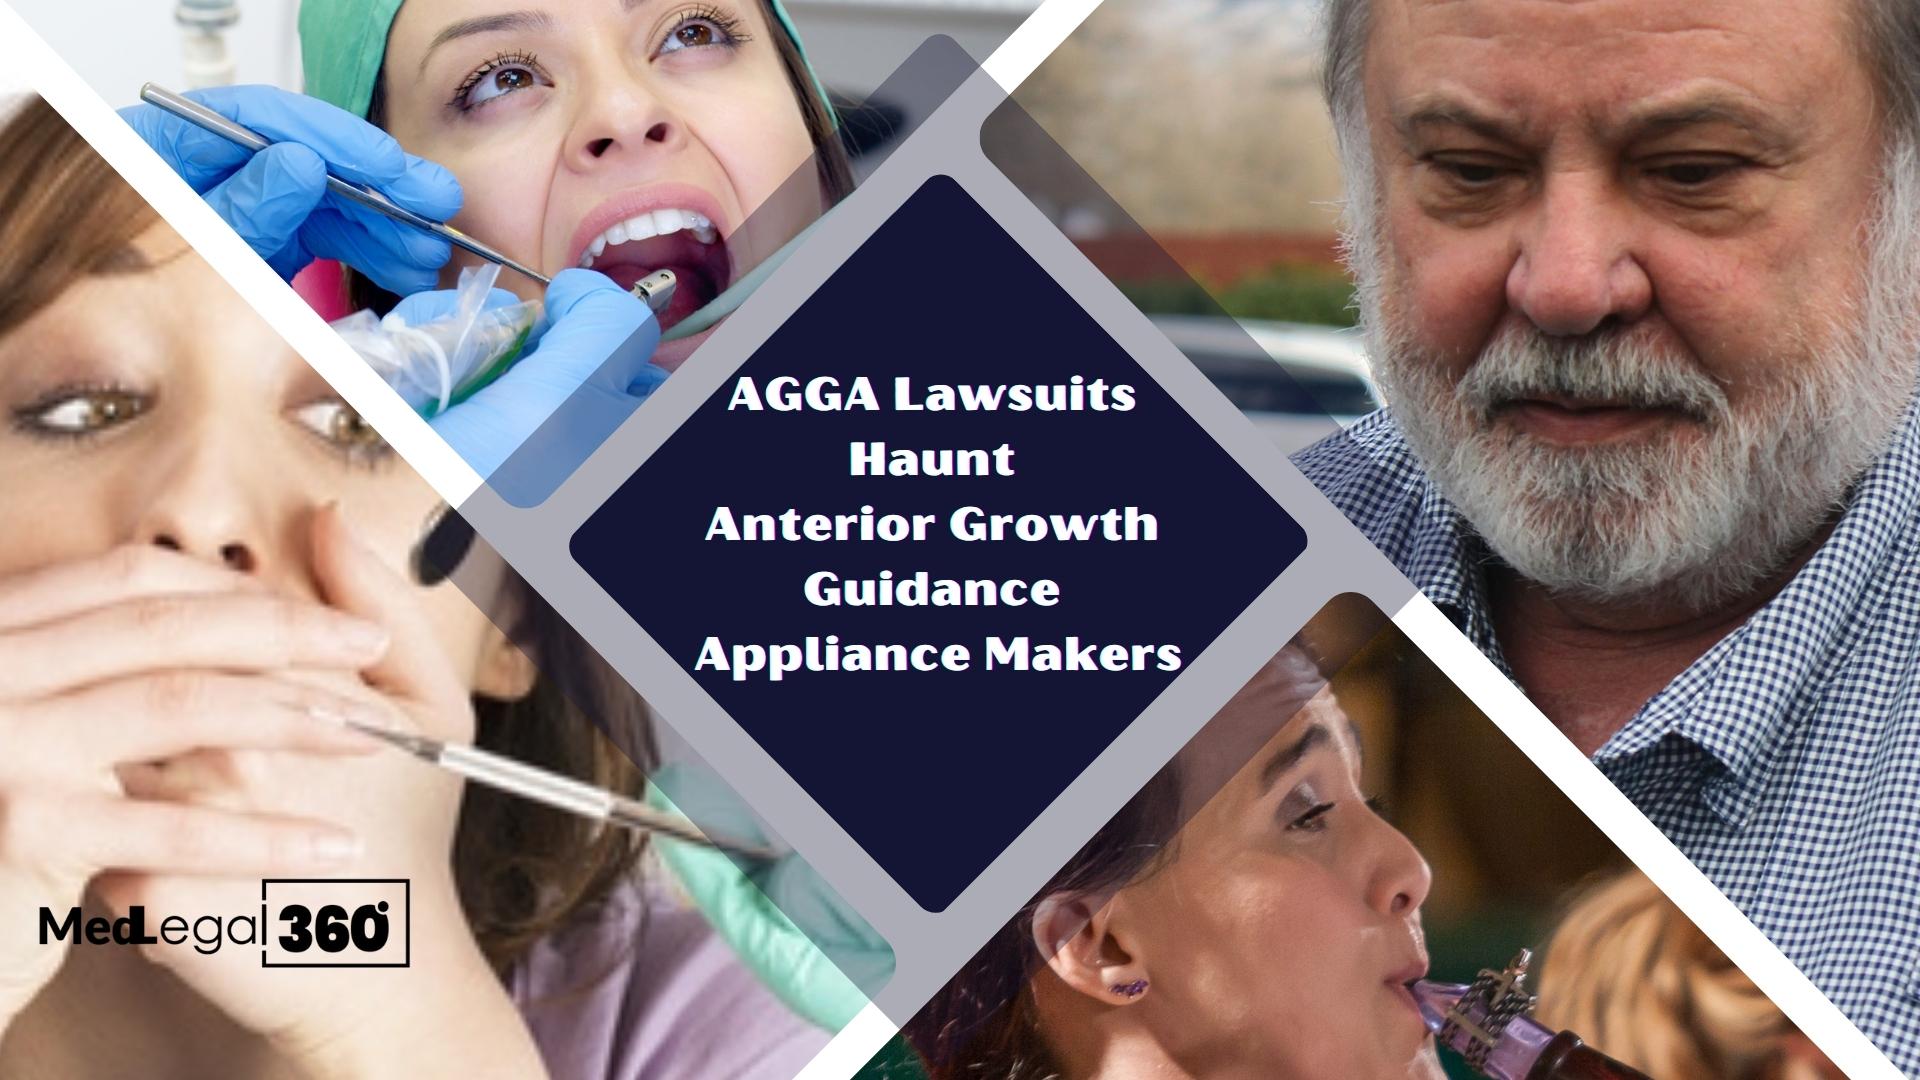 AGGA Appliance Lawsuits Haunt Anterior Growth Guidance Appliance Makers